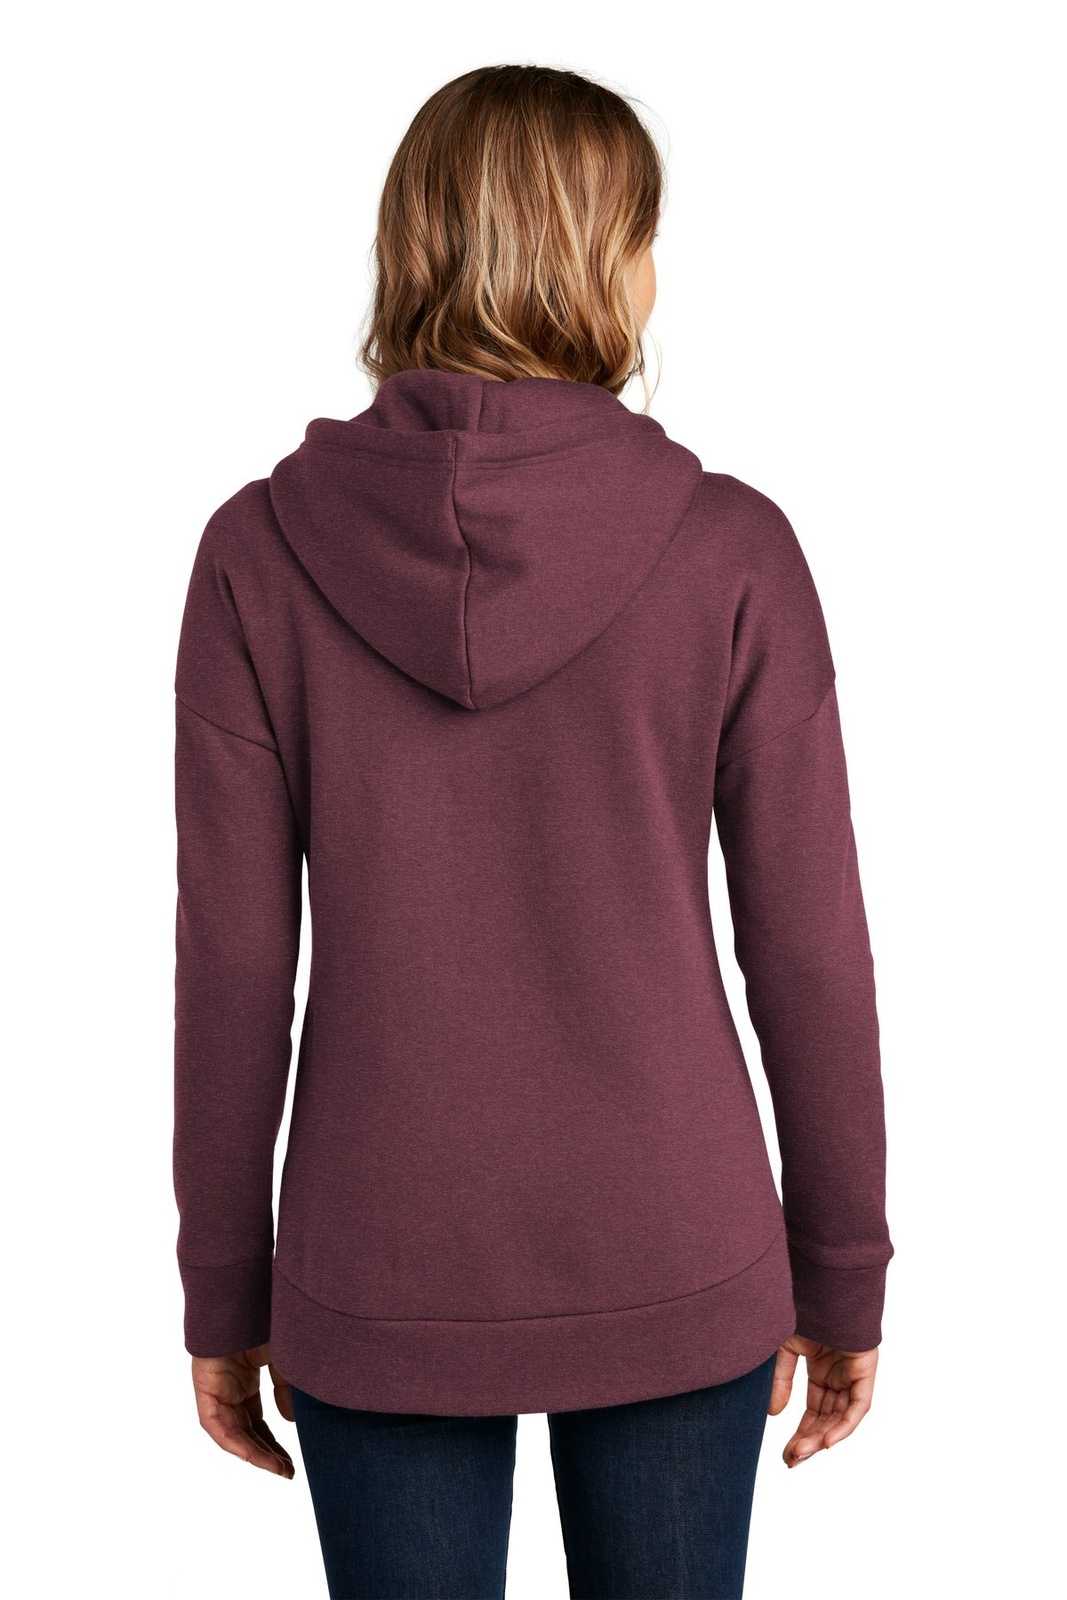 District DT1104 Womens Perfect Weight Fleece Drop Shoulder Full-Zip Hoodie - Heathered Loganberry - HIT a Double - 1